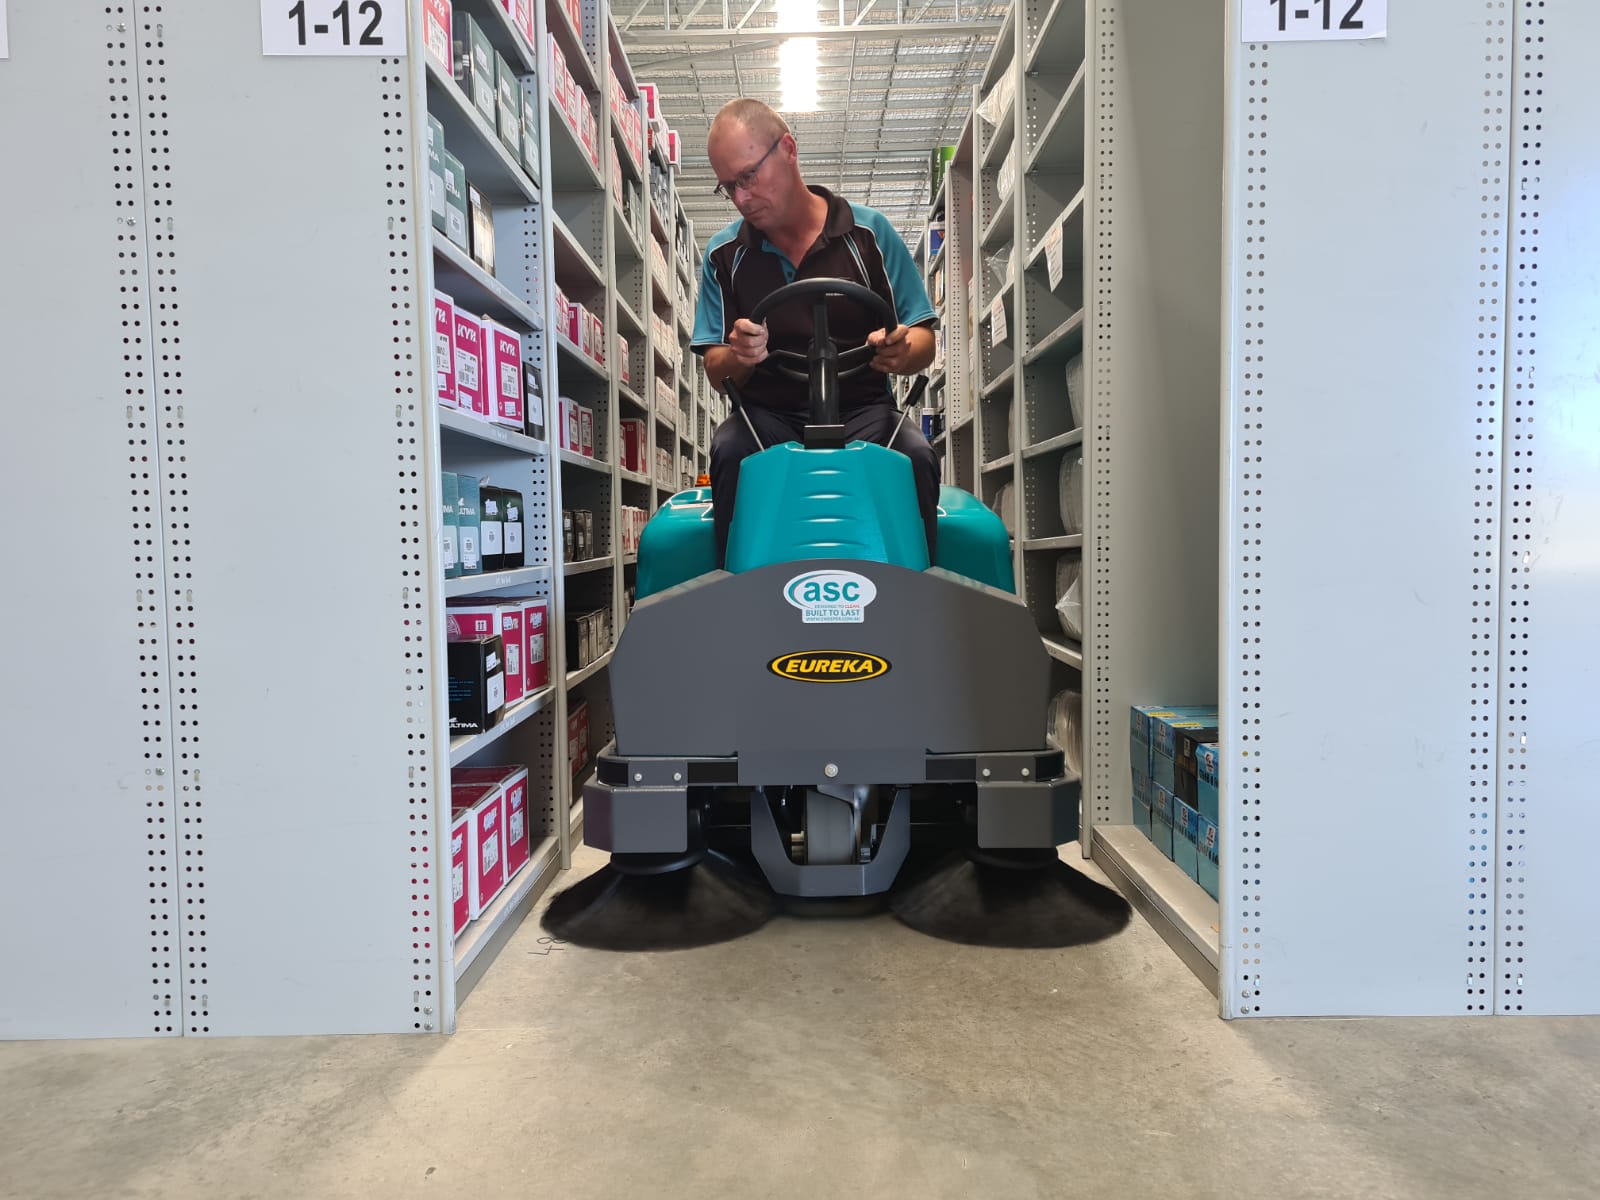 How Are Compact Sweepers Used To Clean Tight Spaces?